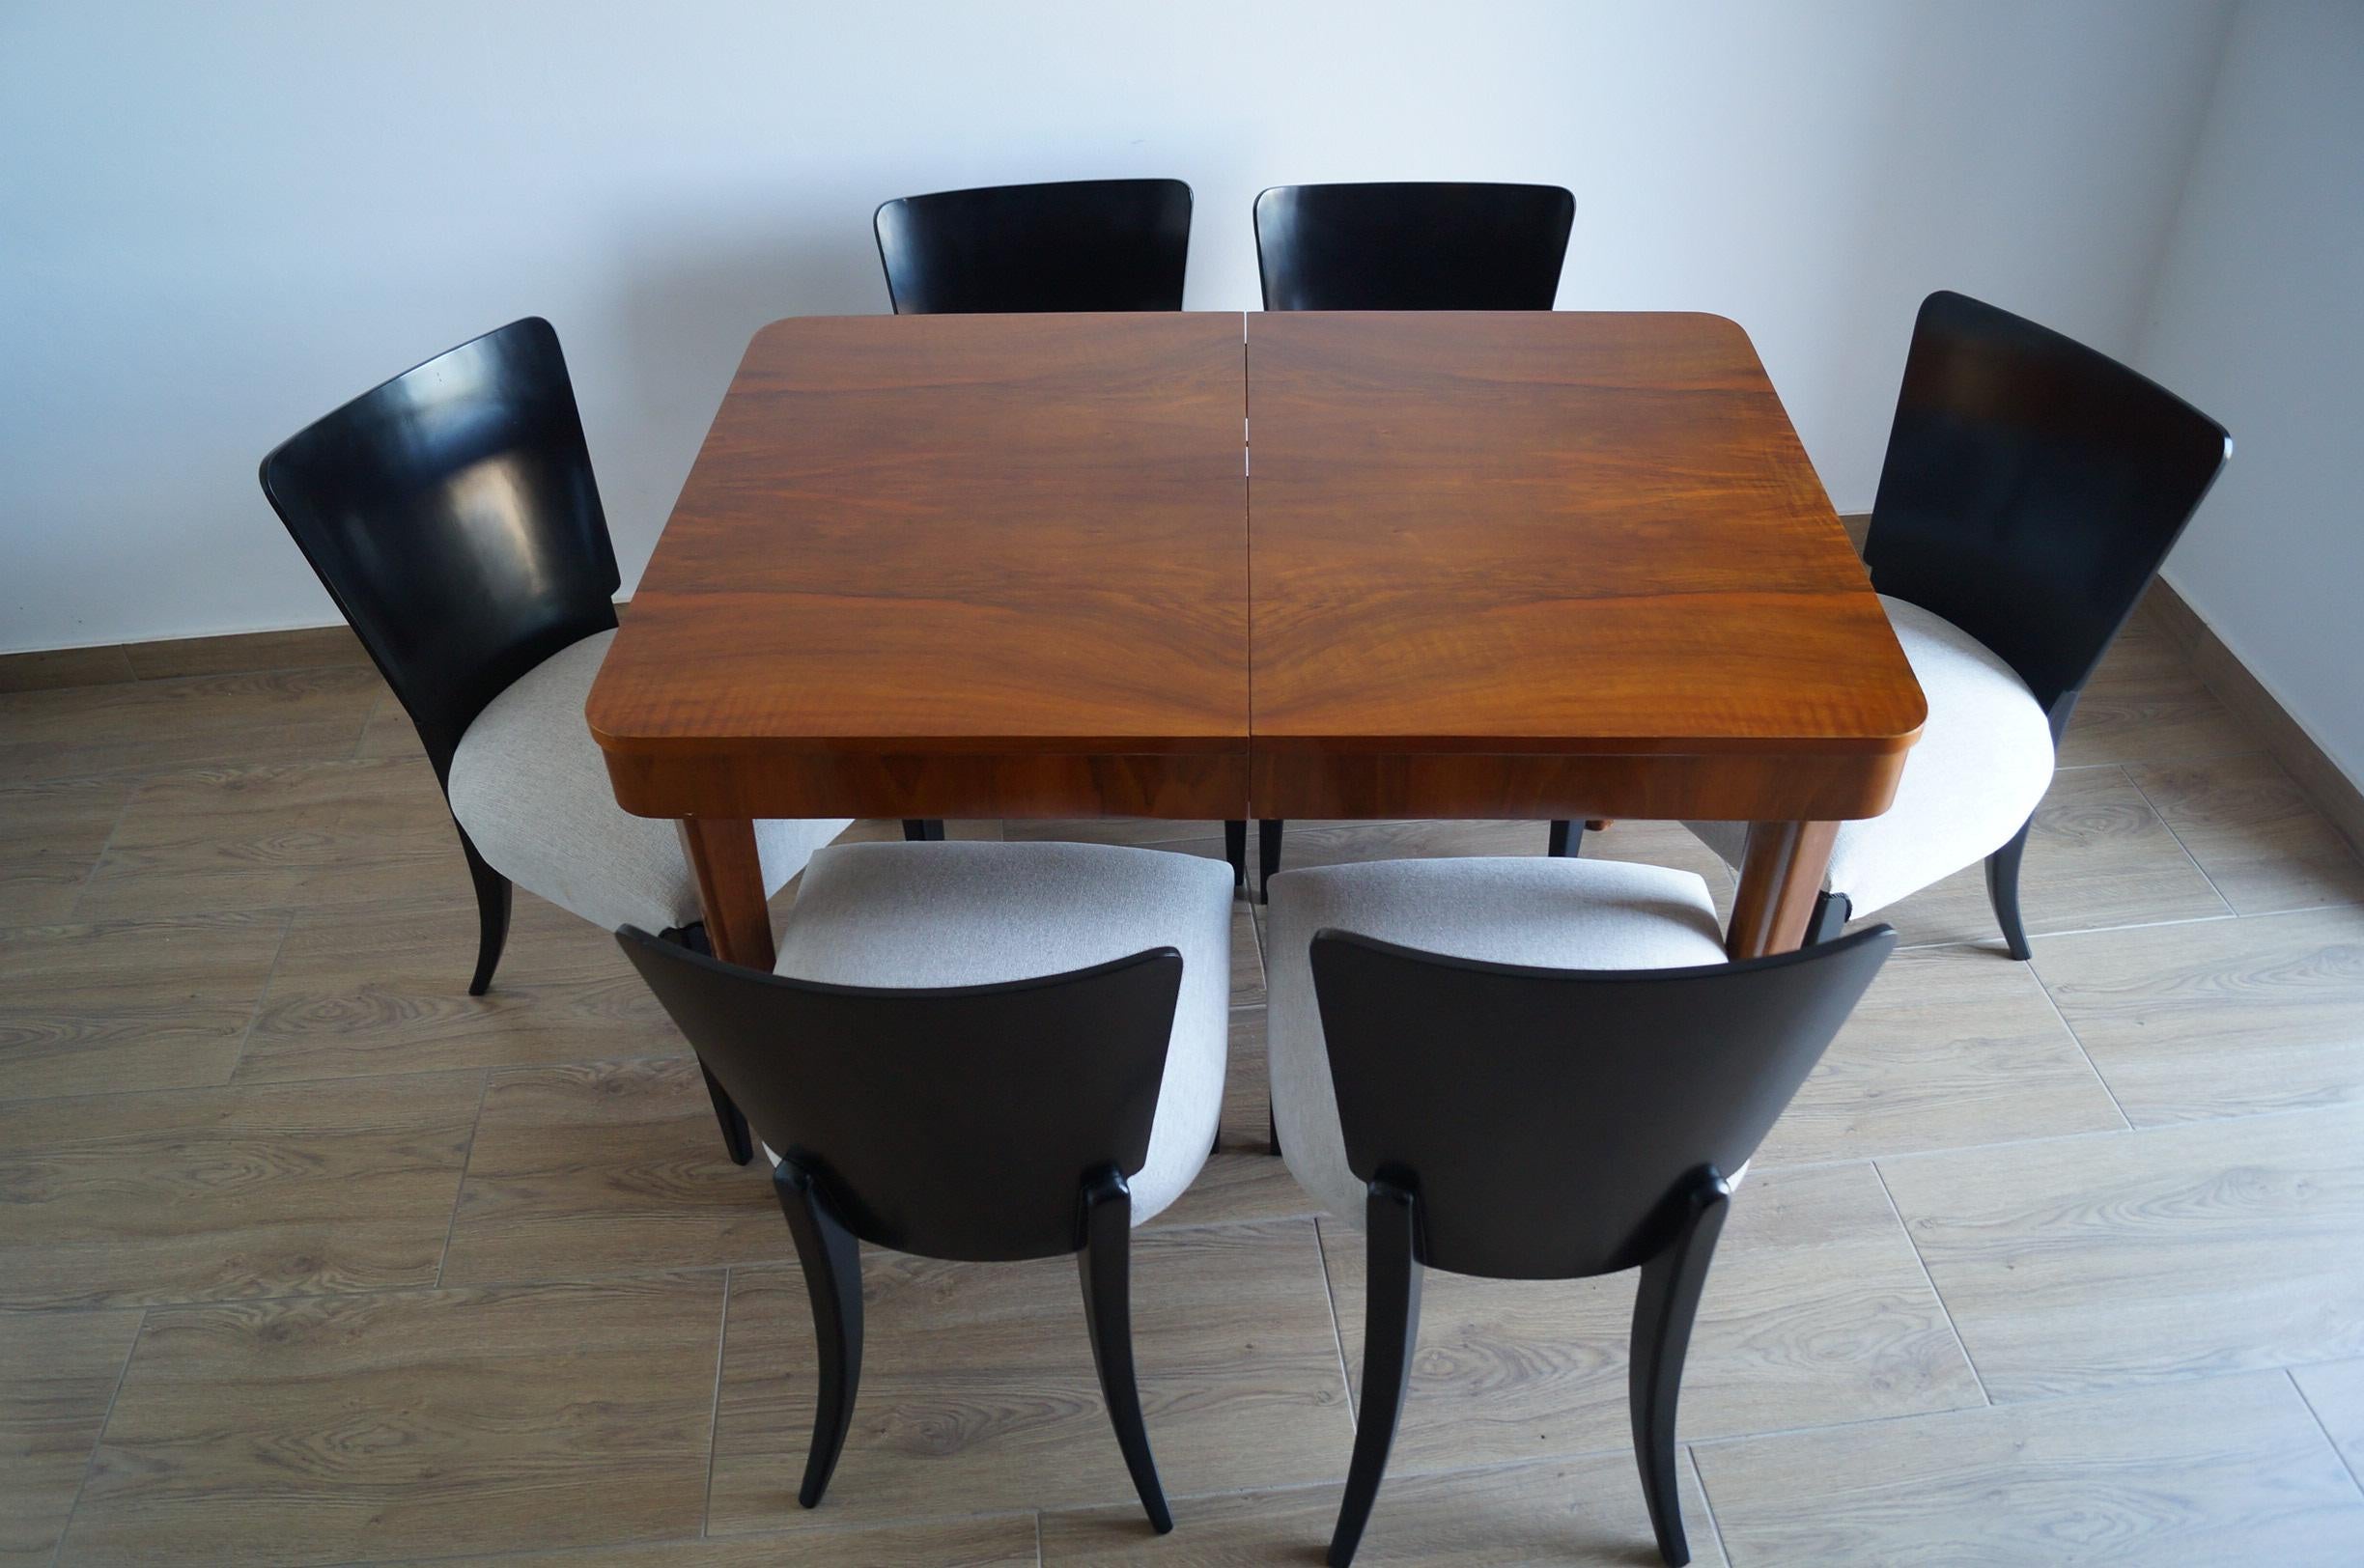 We present Art Deco dining furniture that includes a table and six chairs. A set from 1940, designed by a famous Czech designer
Jindrich Halabala - (a Czech designer ranked among the most outstanding creators of the modern period. The peak of his